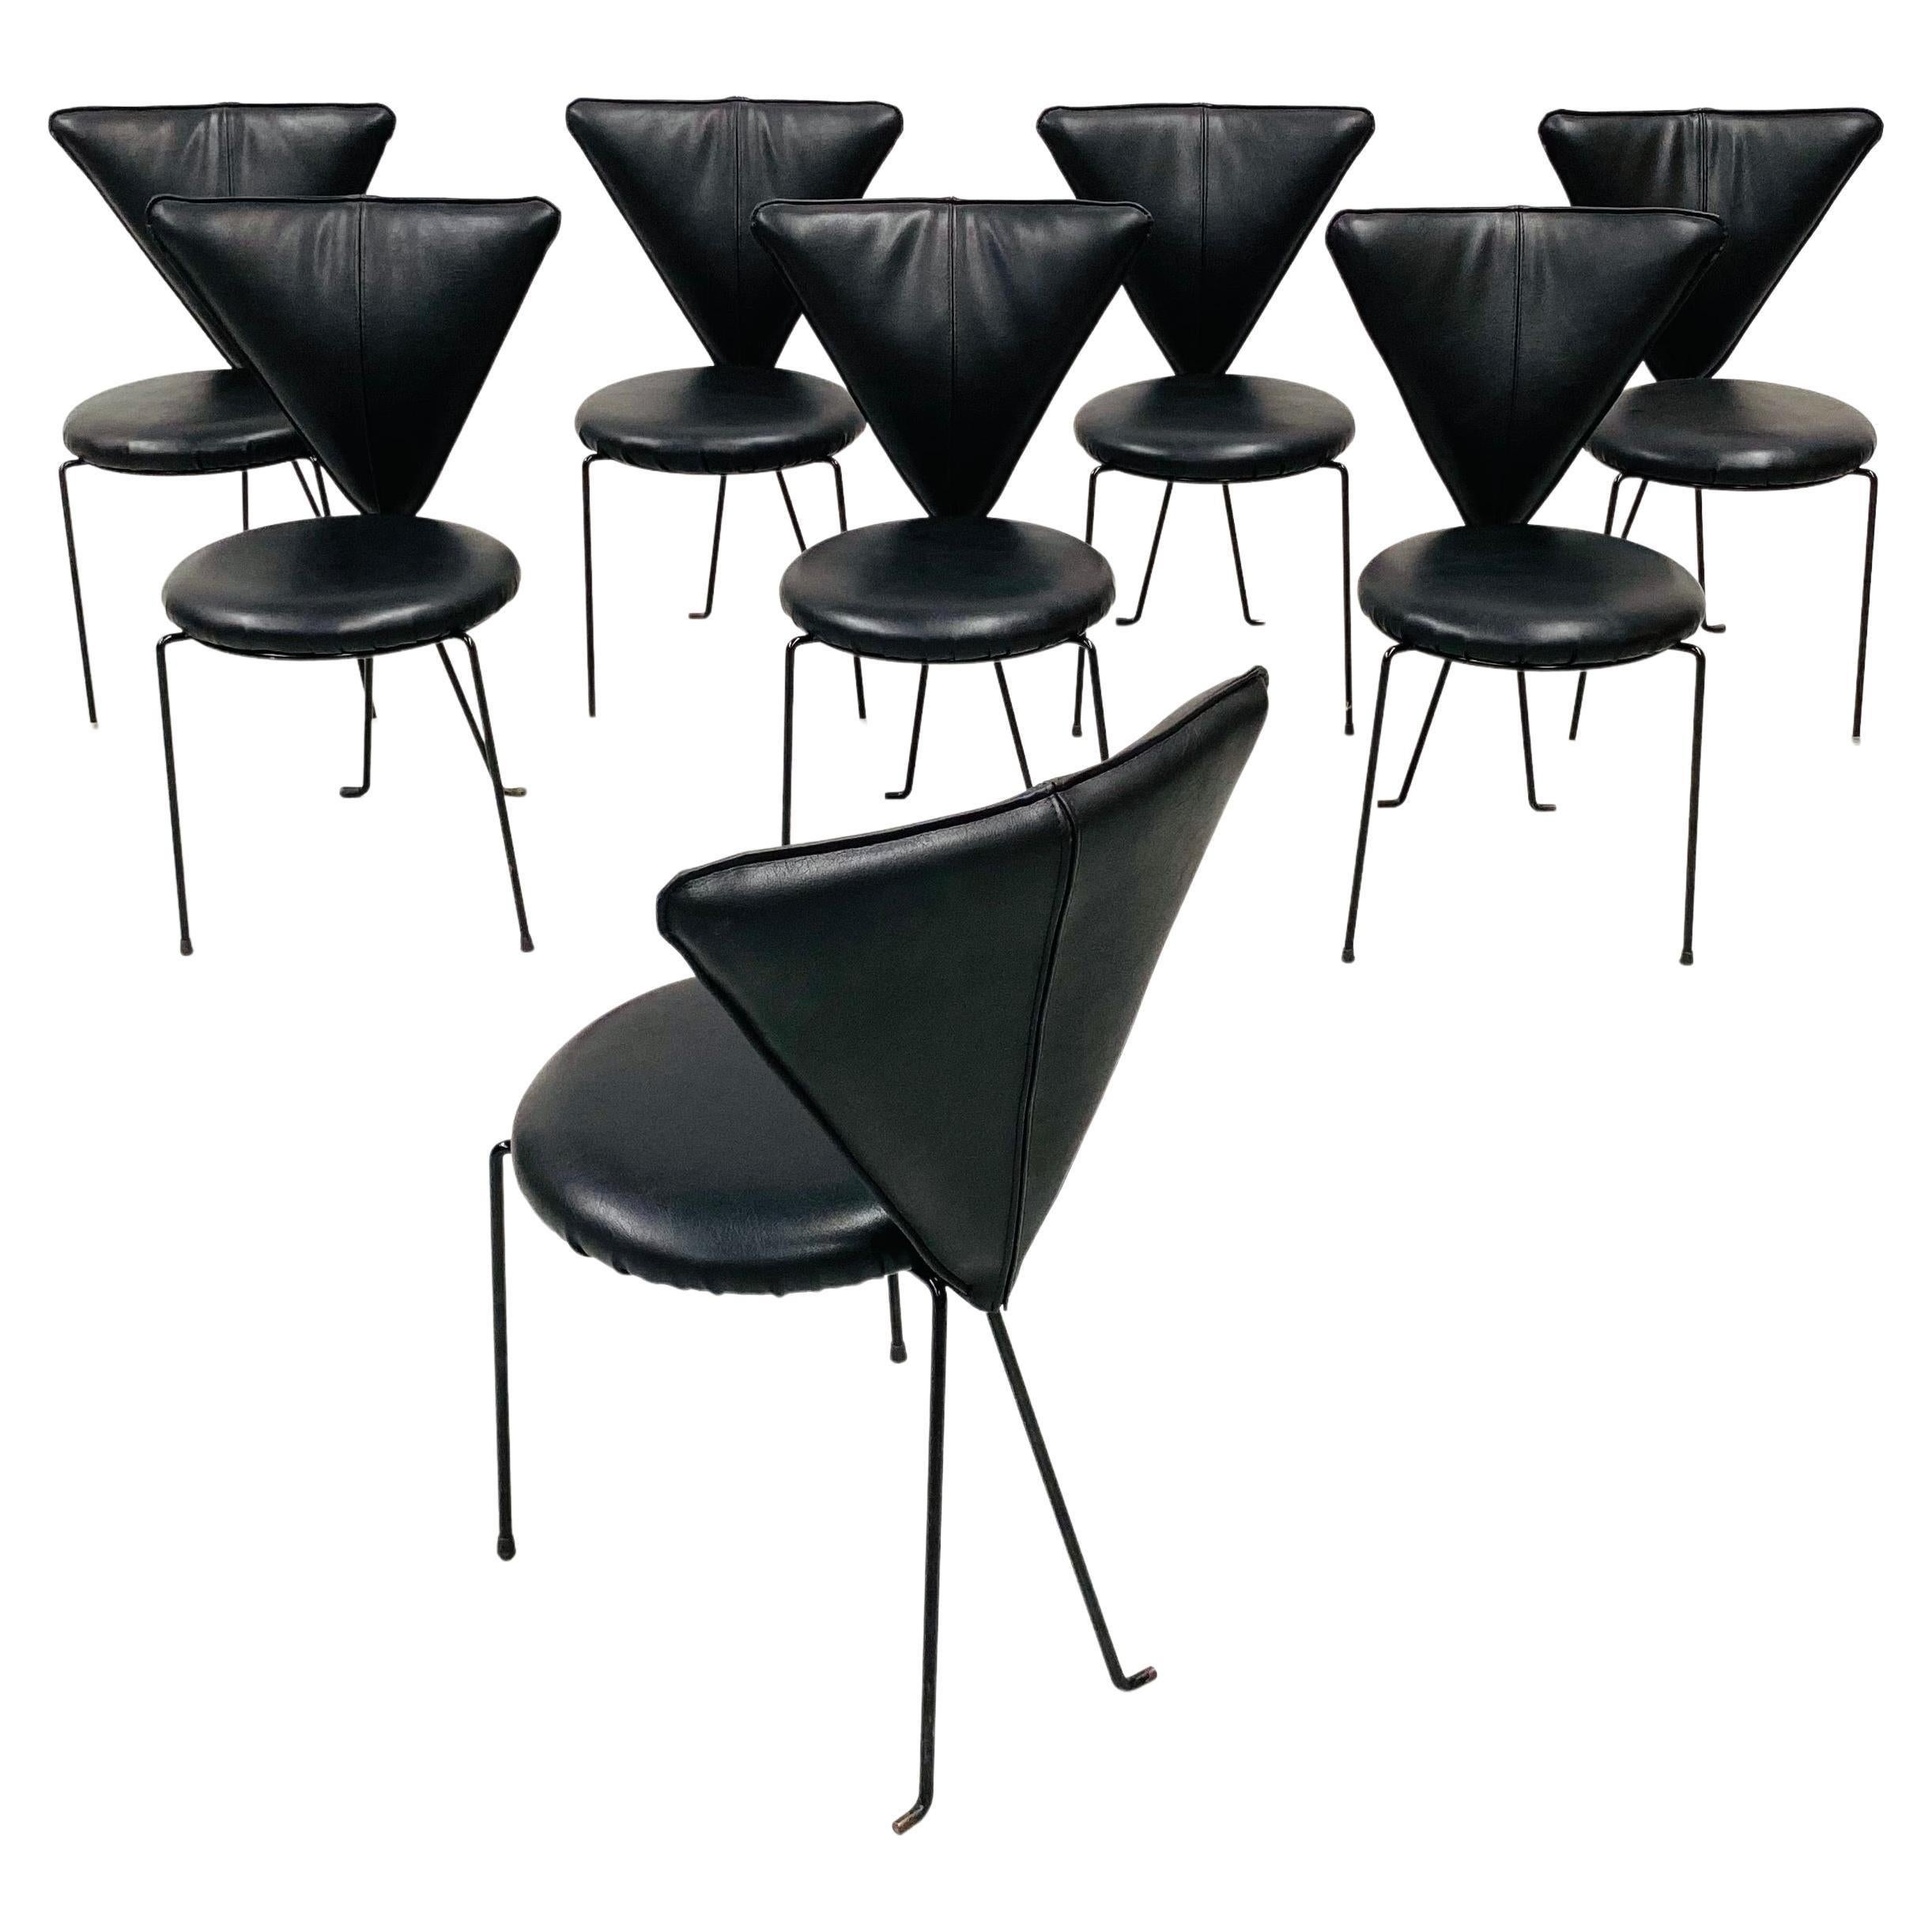 Late 20th Century Vintage German Memphis Chairs in Black Leather by Lübke & Co., 1980s, Set of 8